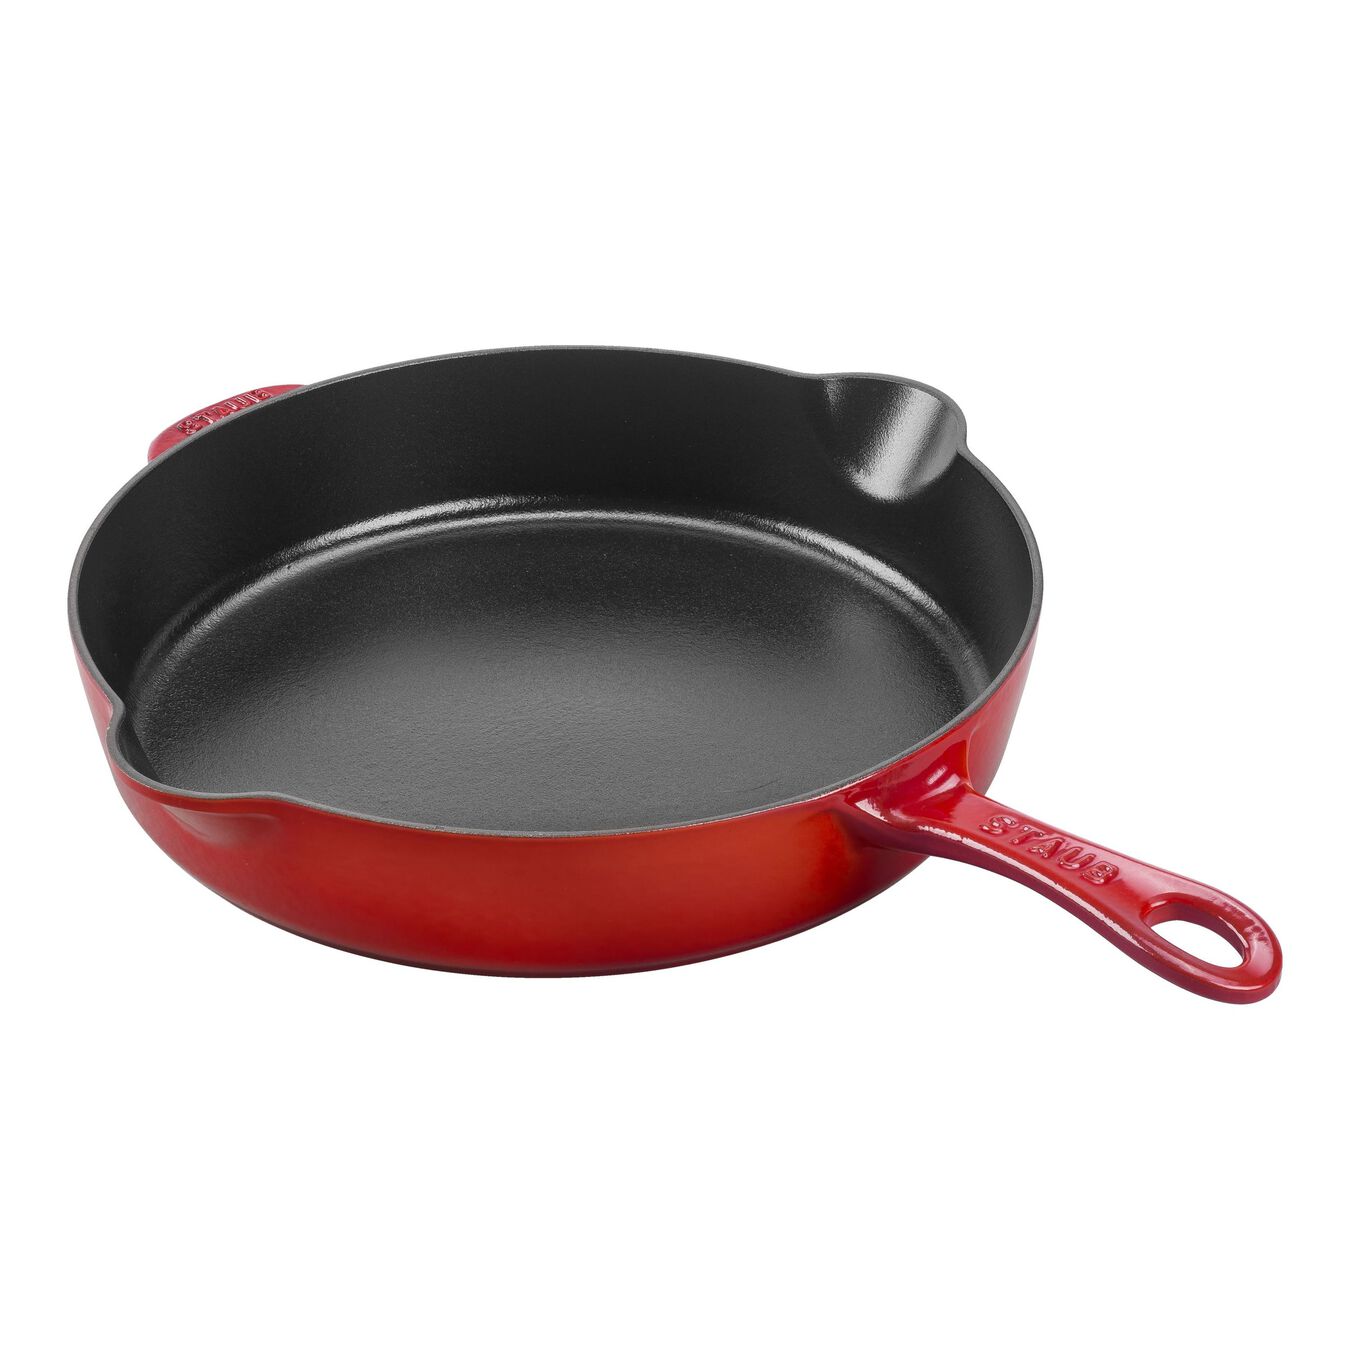 28 cm / 11 inch cast iron Traditional Deep Frypan, cherry,,large 1